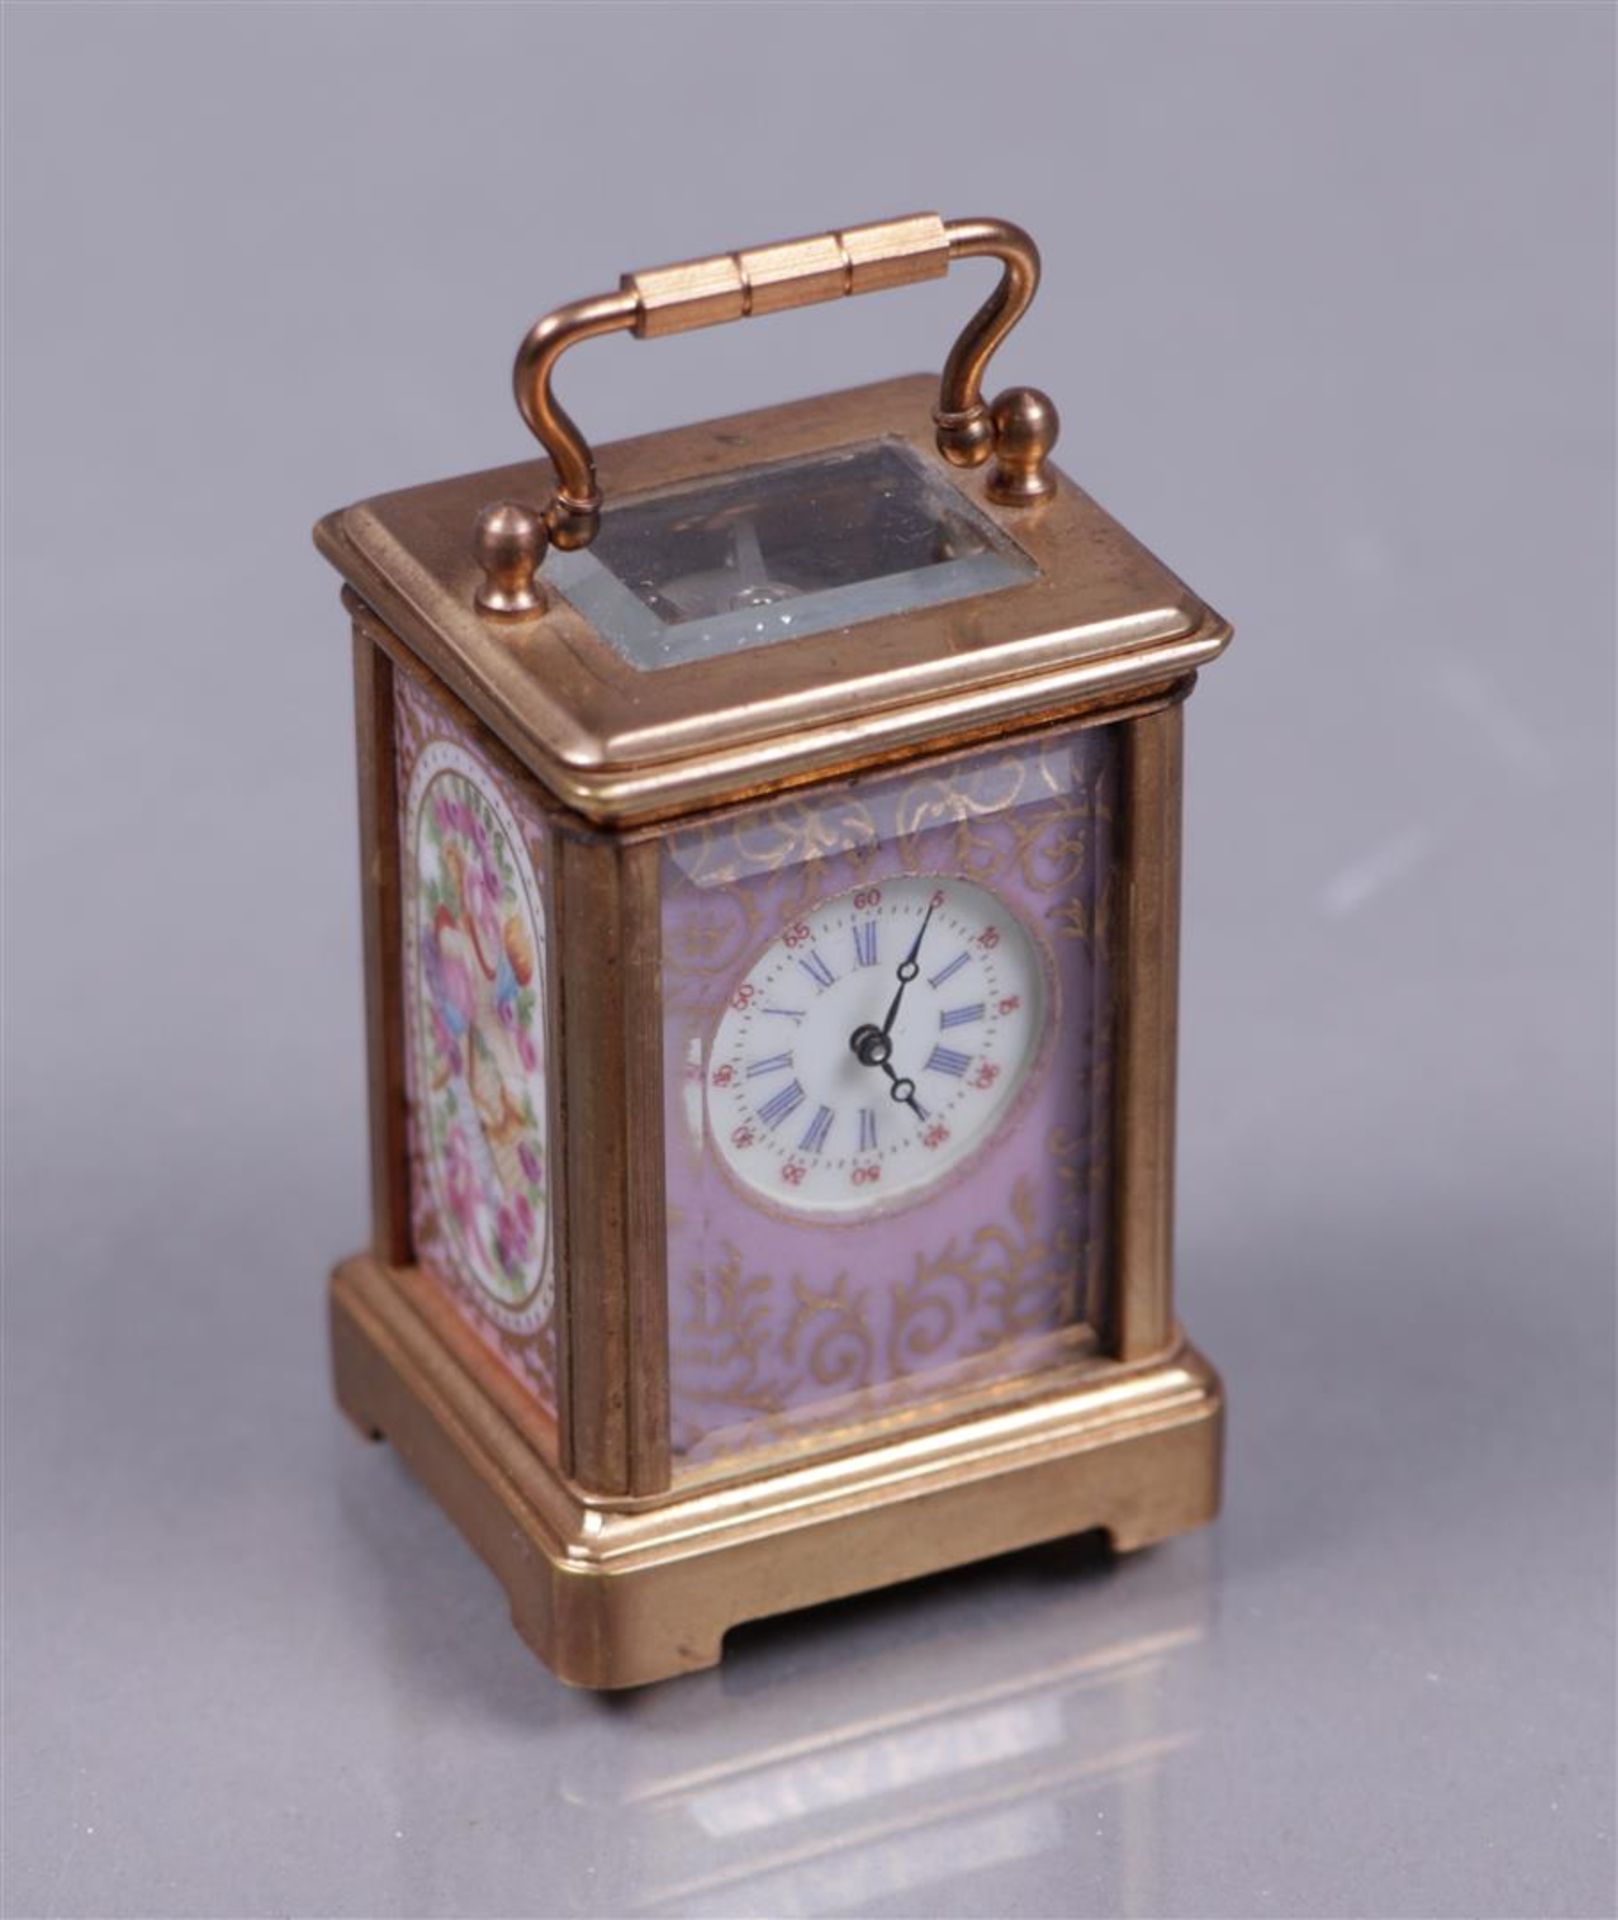 A brass travel alarm clock with polychrome decorated plaques, 20th century.
H.: 5,5 cm.